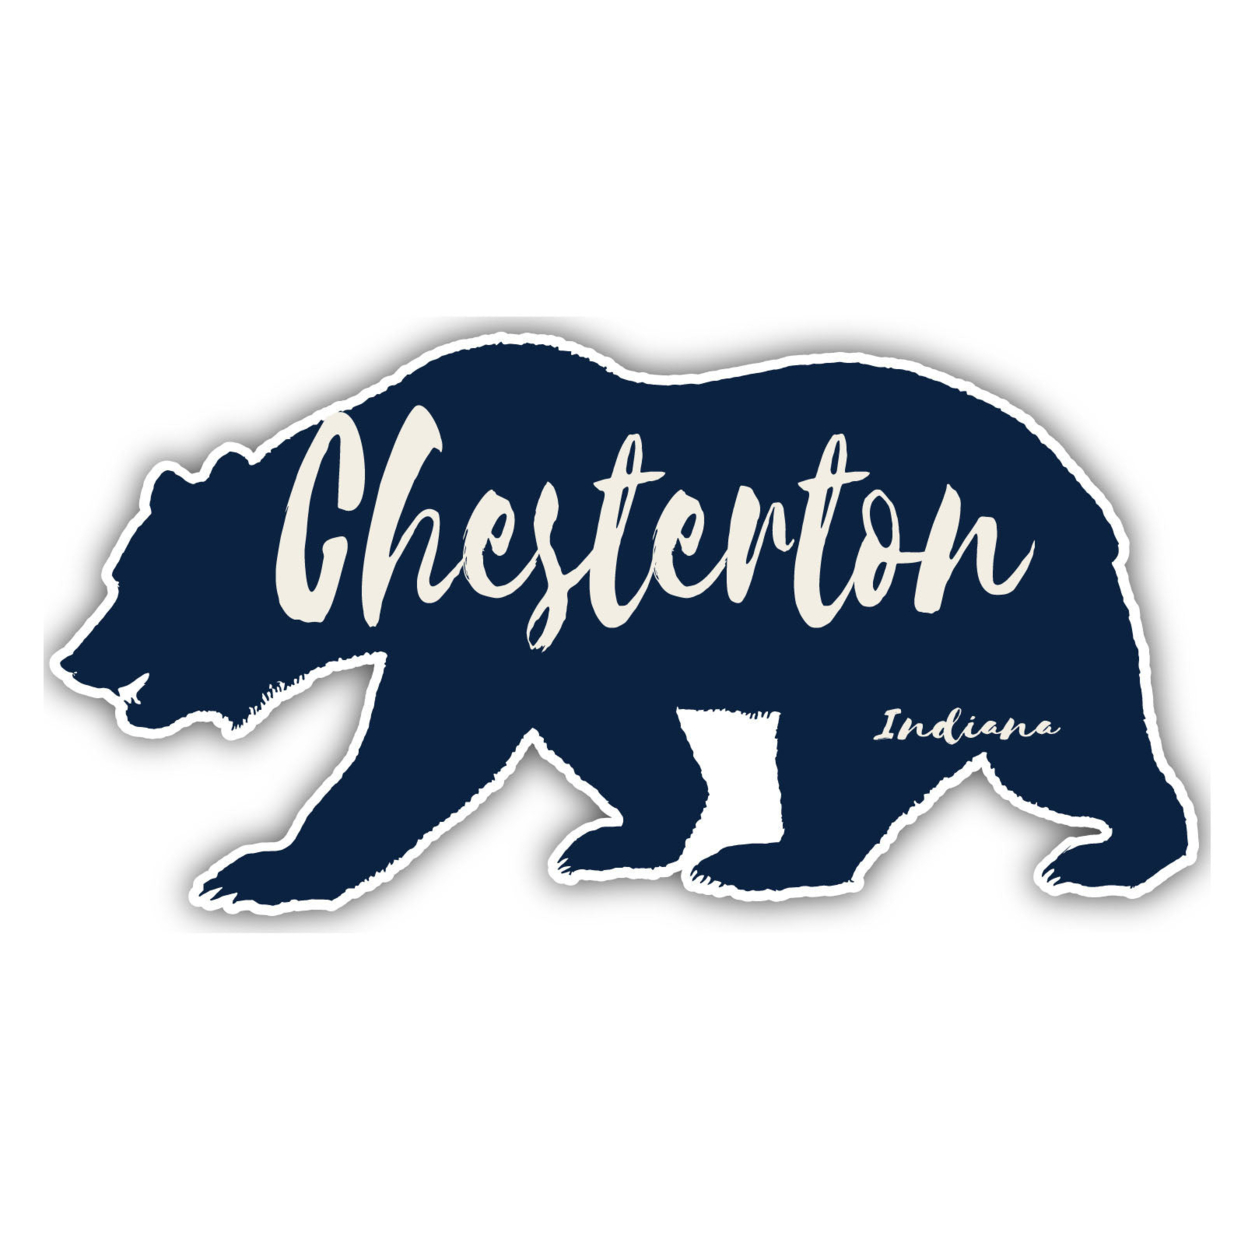 Chesterton Indiana Souvenir Decorative Stickers (Choose Theme And Size) - 4-Pack, 2-Inch, Adventures Awaits